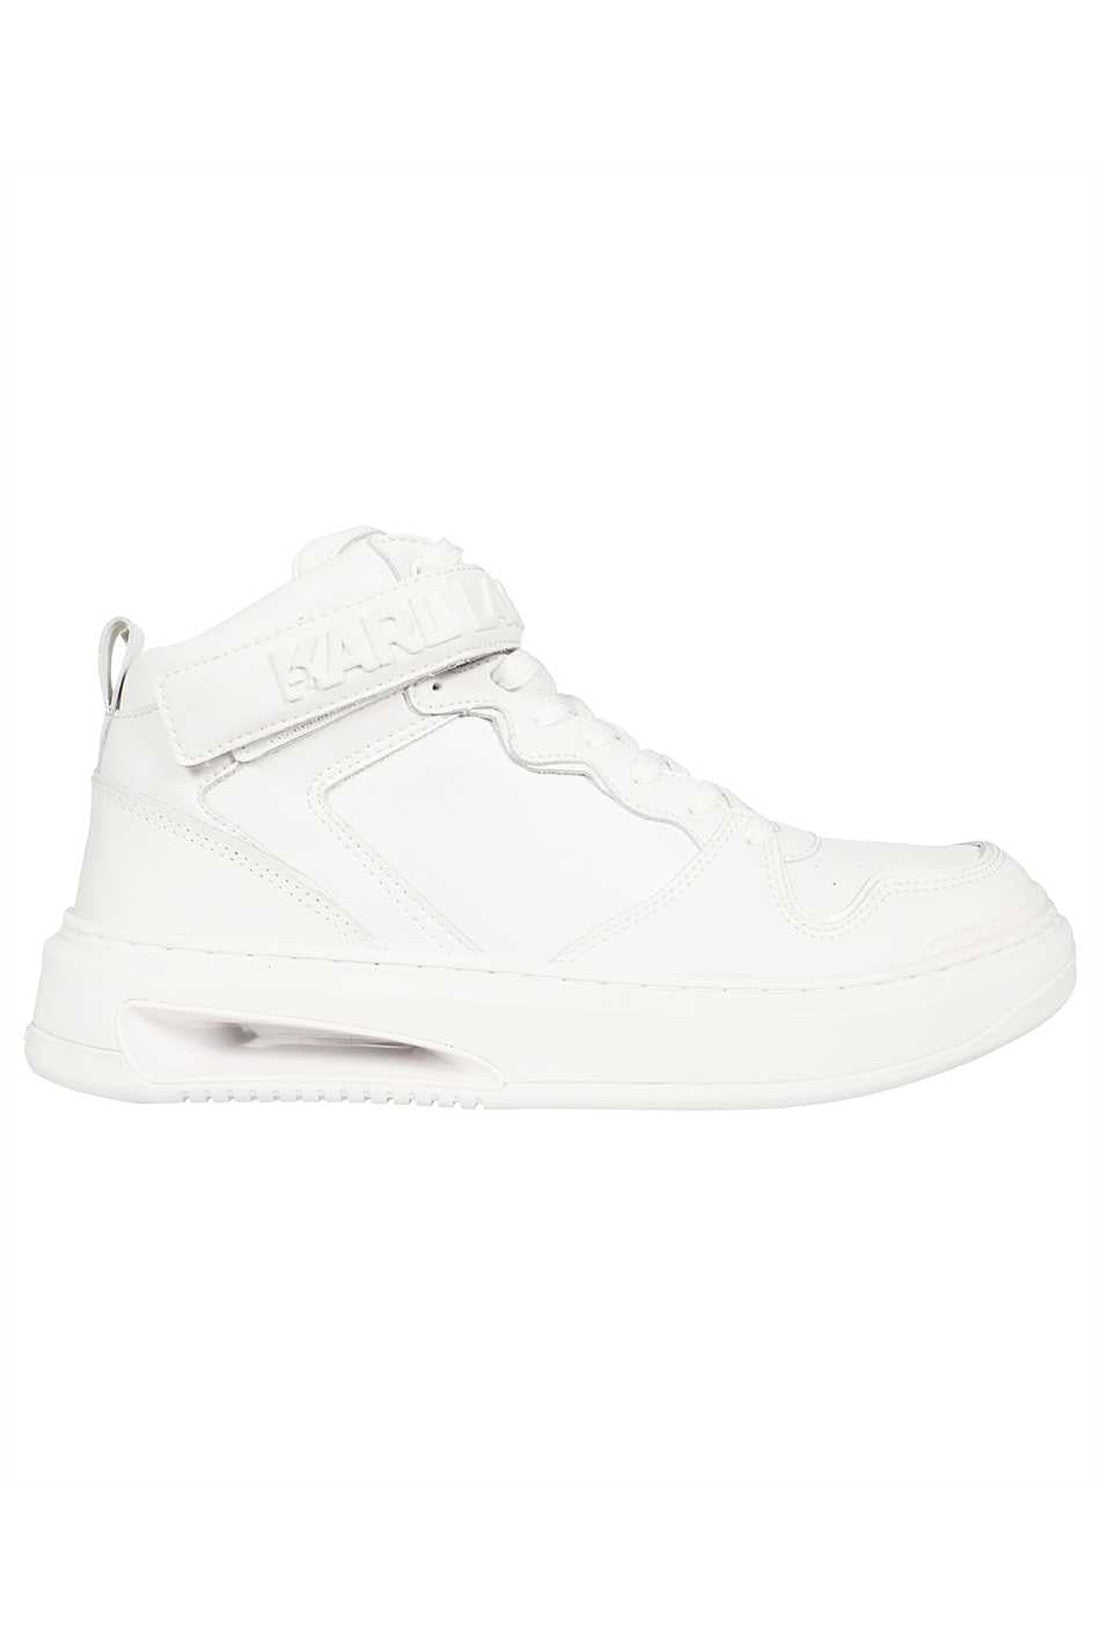 Logo detail leather sneakers-Karl Lagerfeld-OUTLET-SALE-40-ARCHIVIST